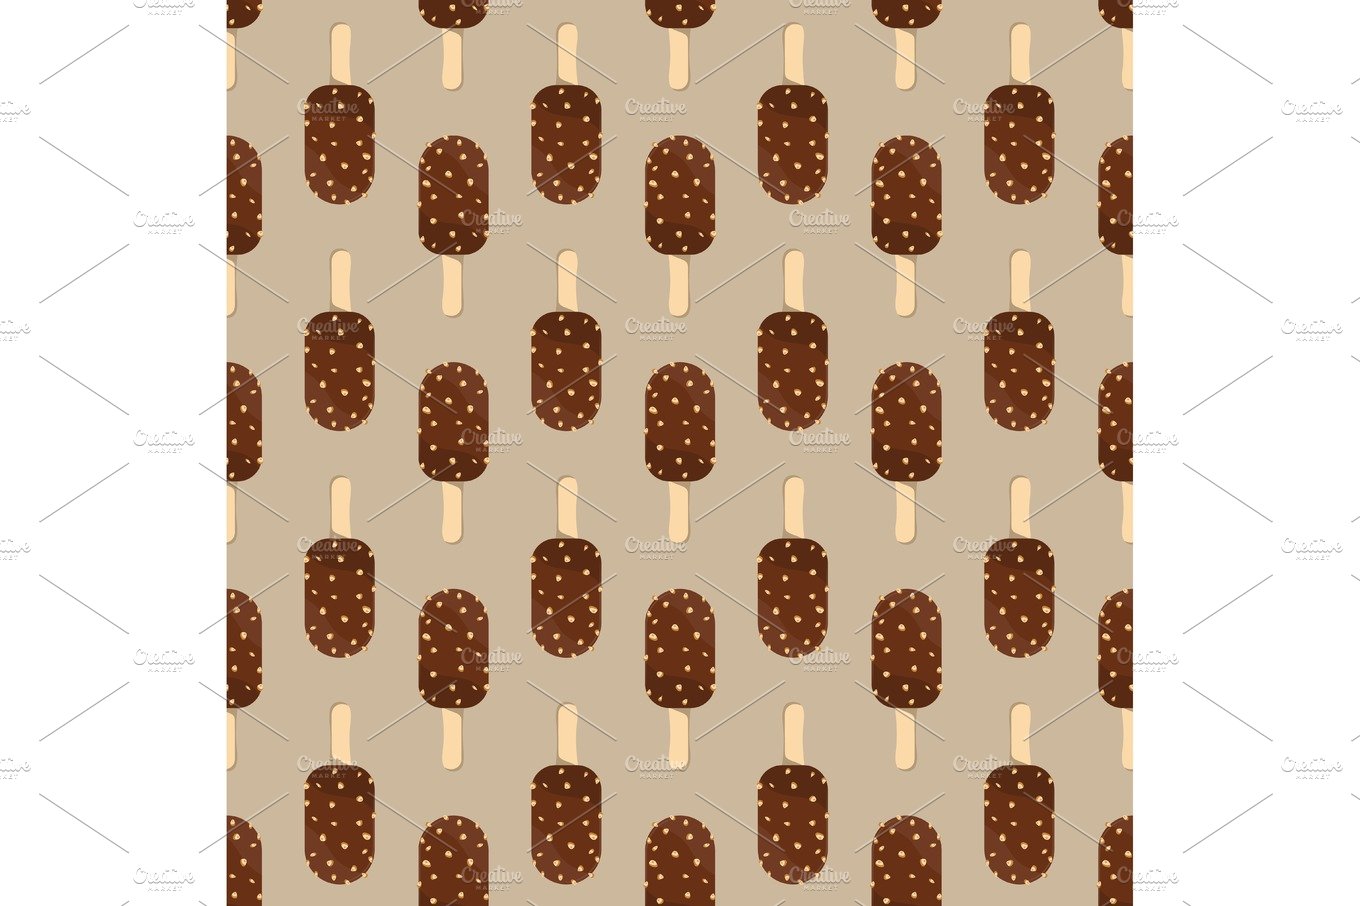 ice cream seamless pattern vector illustration icon isolated cartoon chocol... cover image.